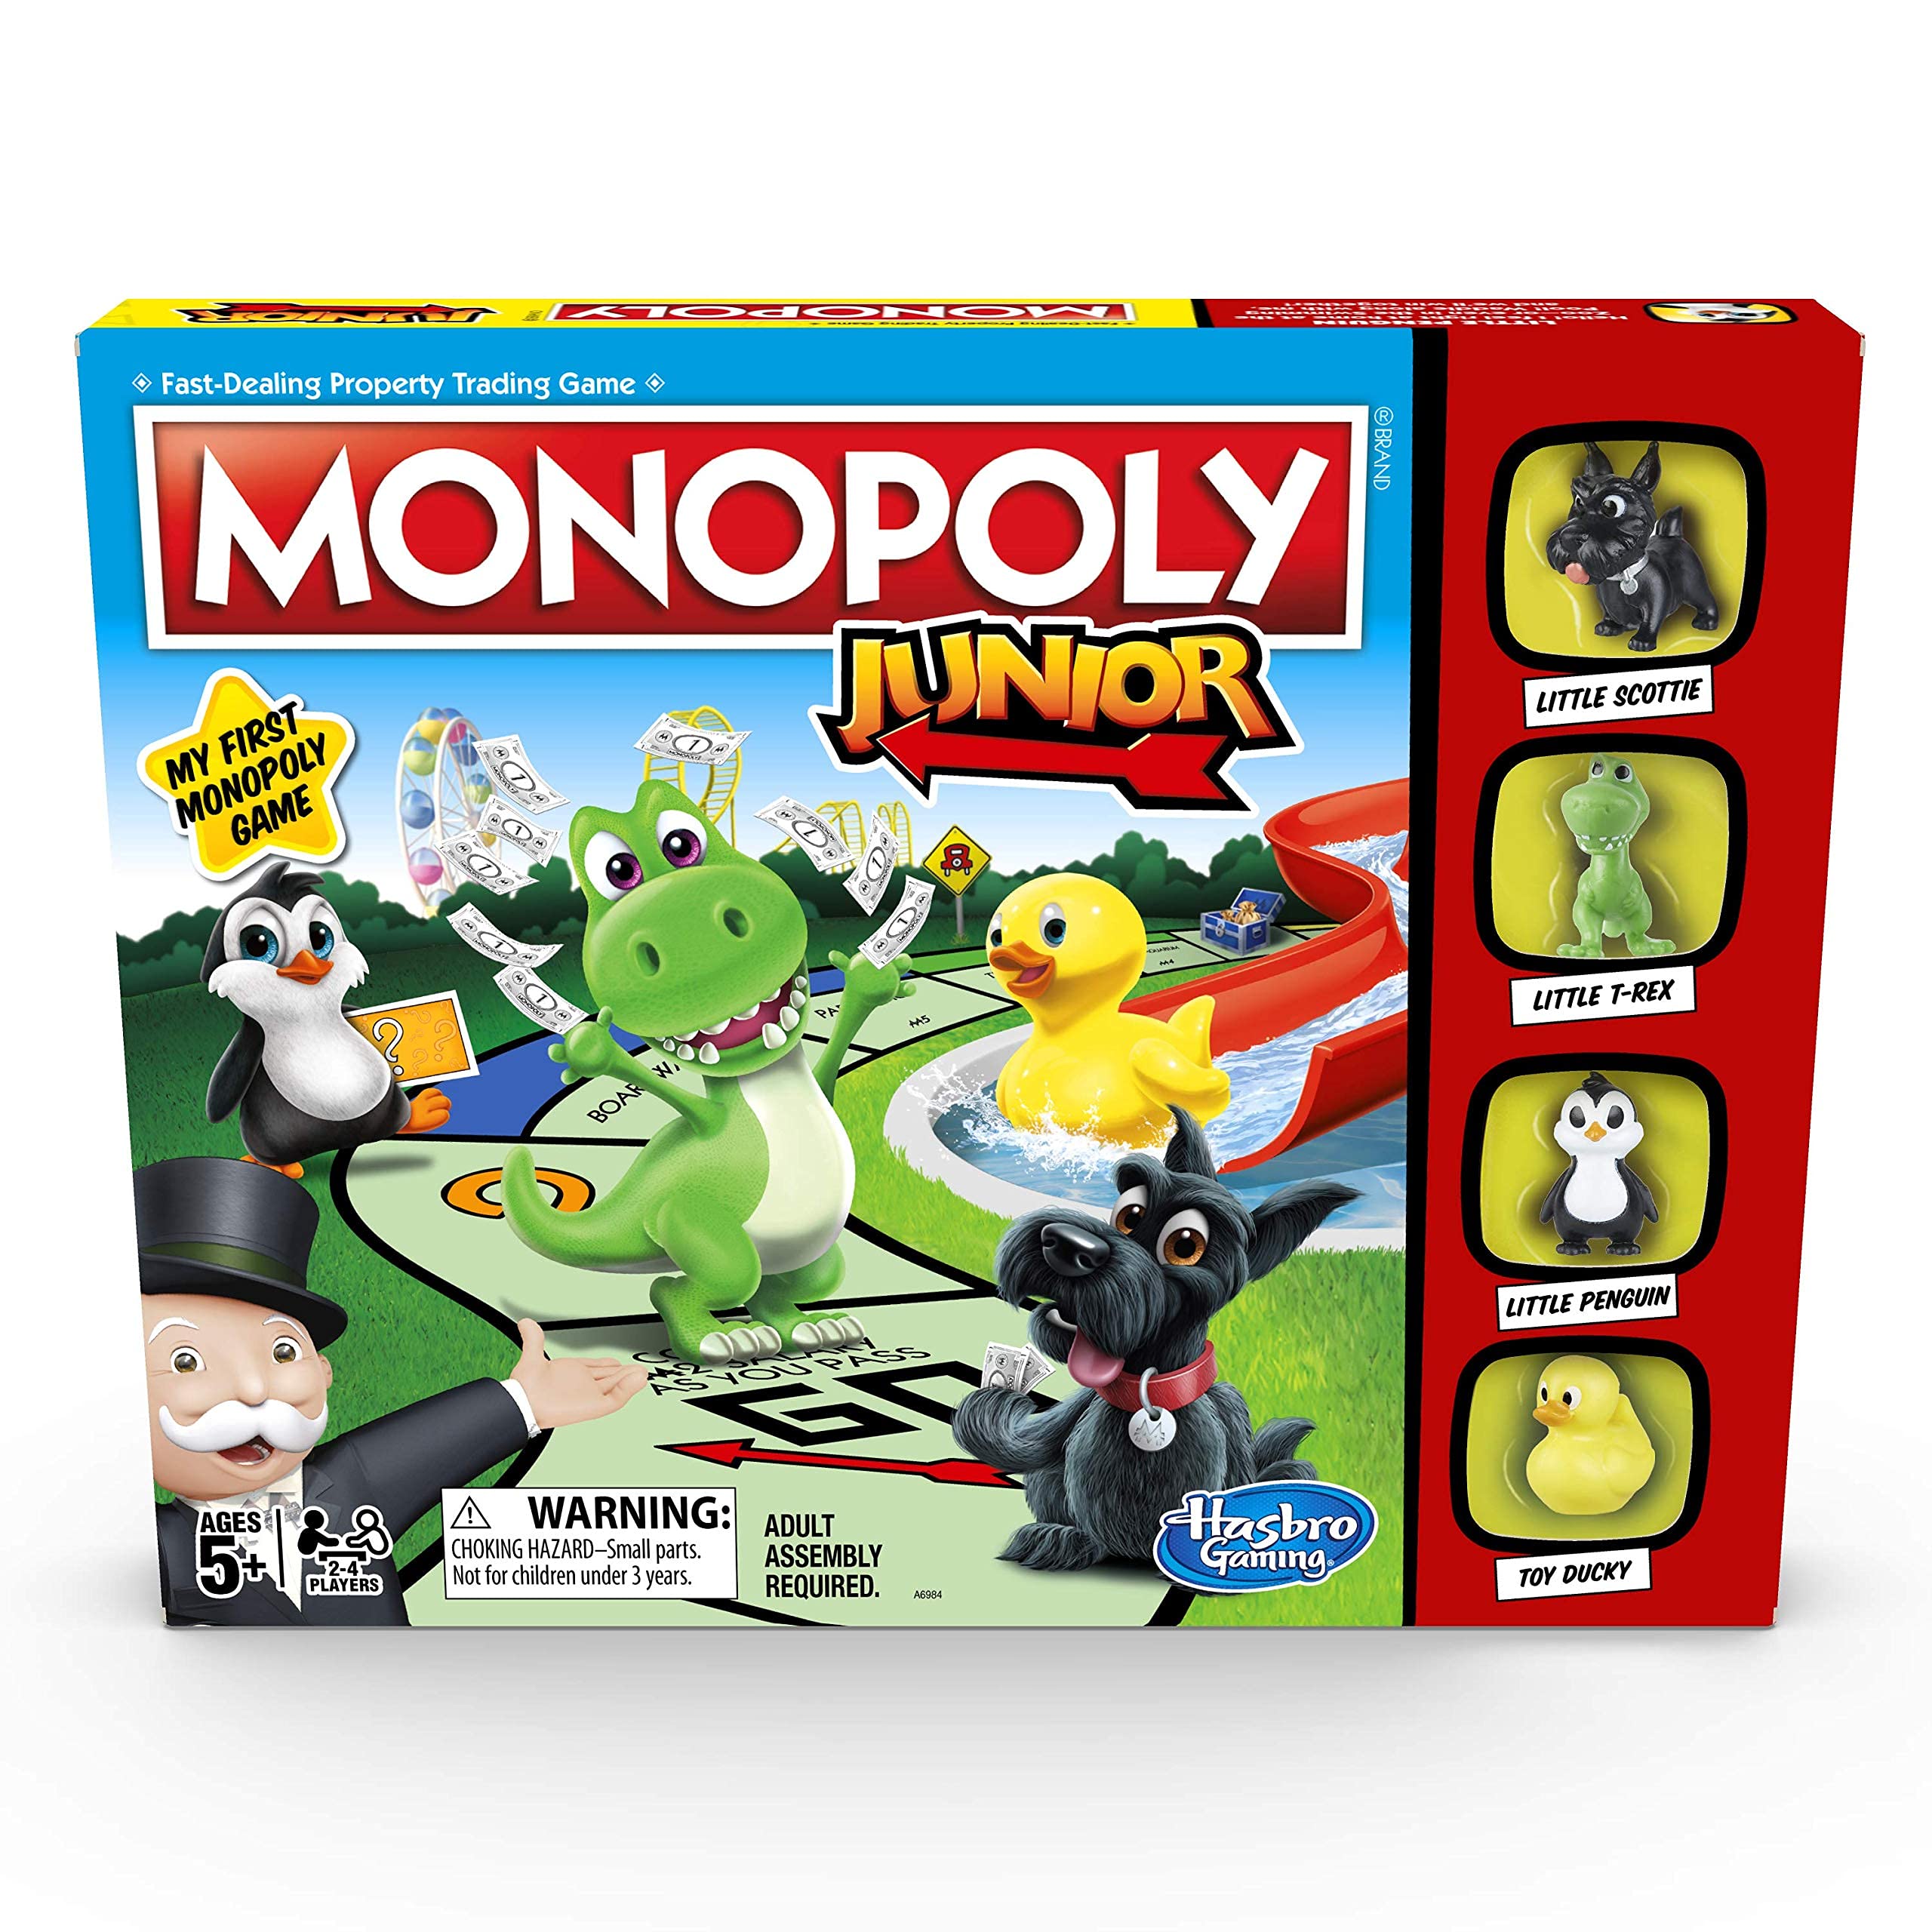 Monopoly Junior Game, Monopoly Board Game for Kids, Family Game for 2-4 Players